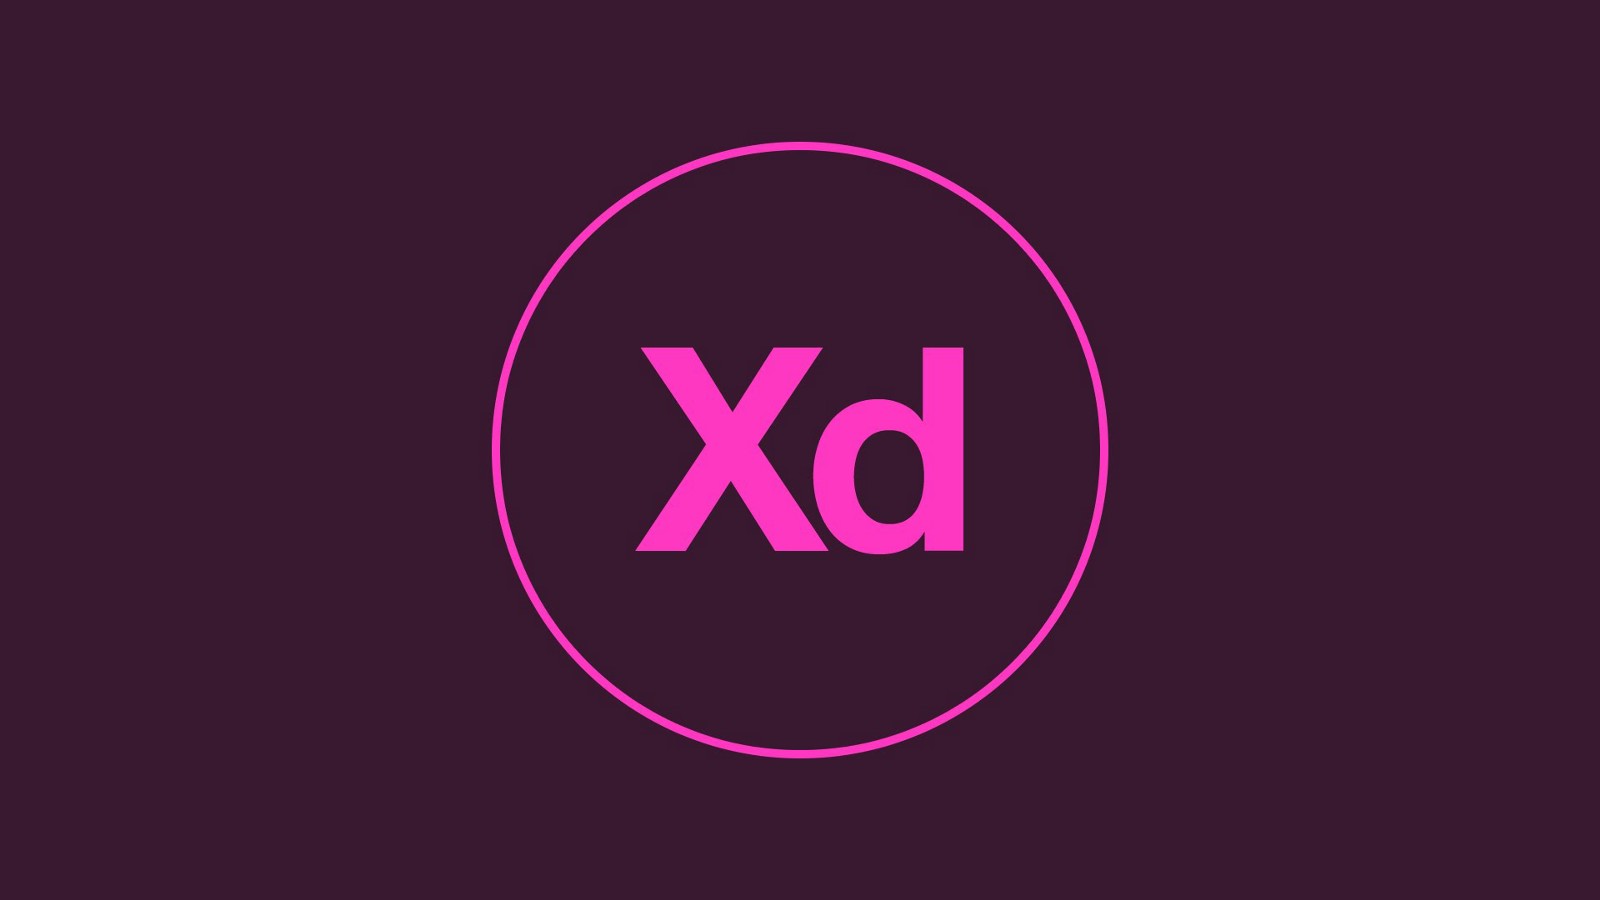 Adobe Xd - Graphic Design , HD Wallpaper & Backgrounds